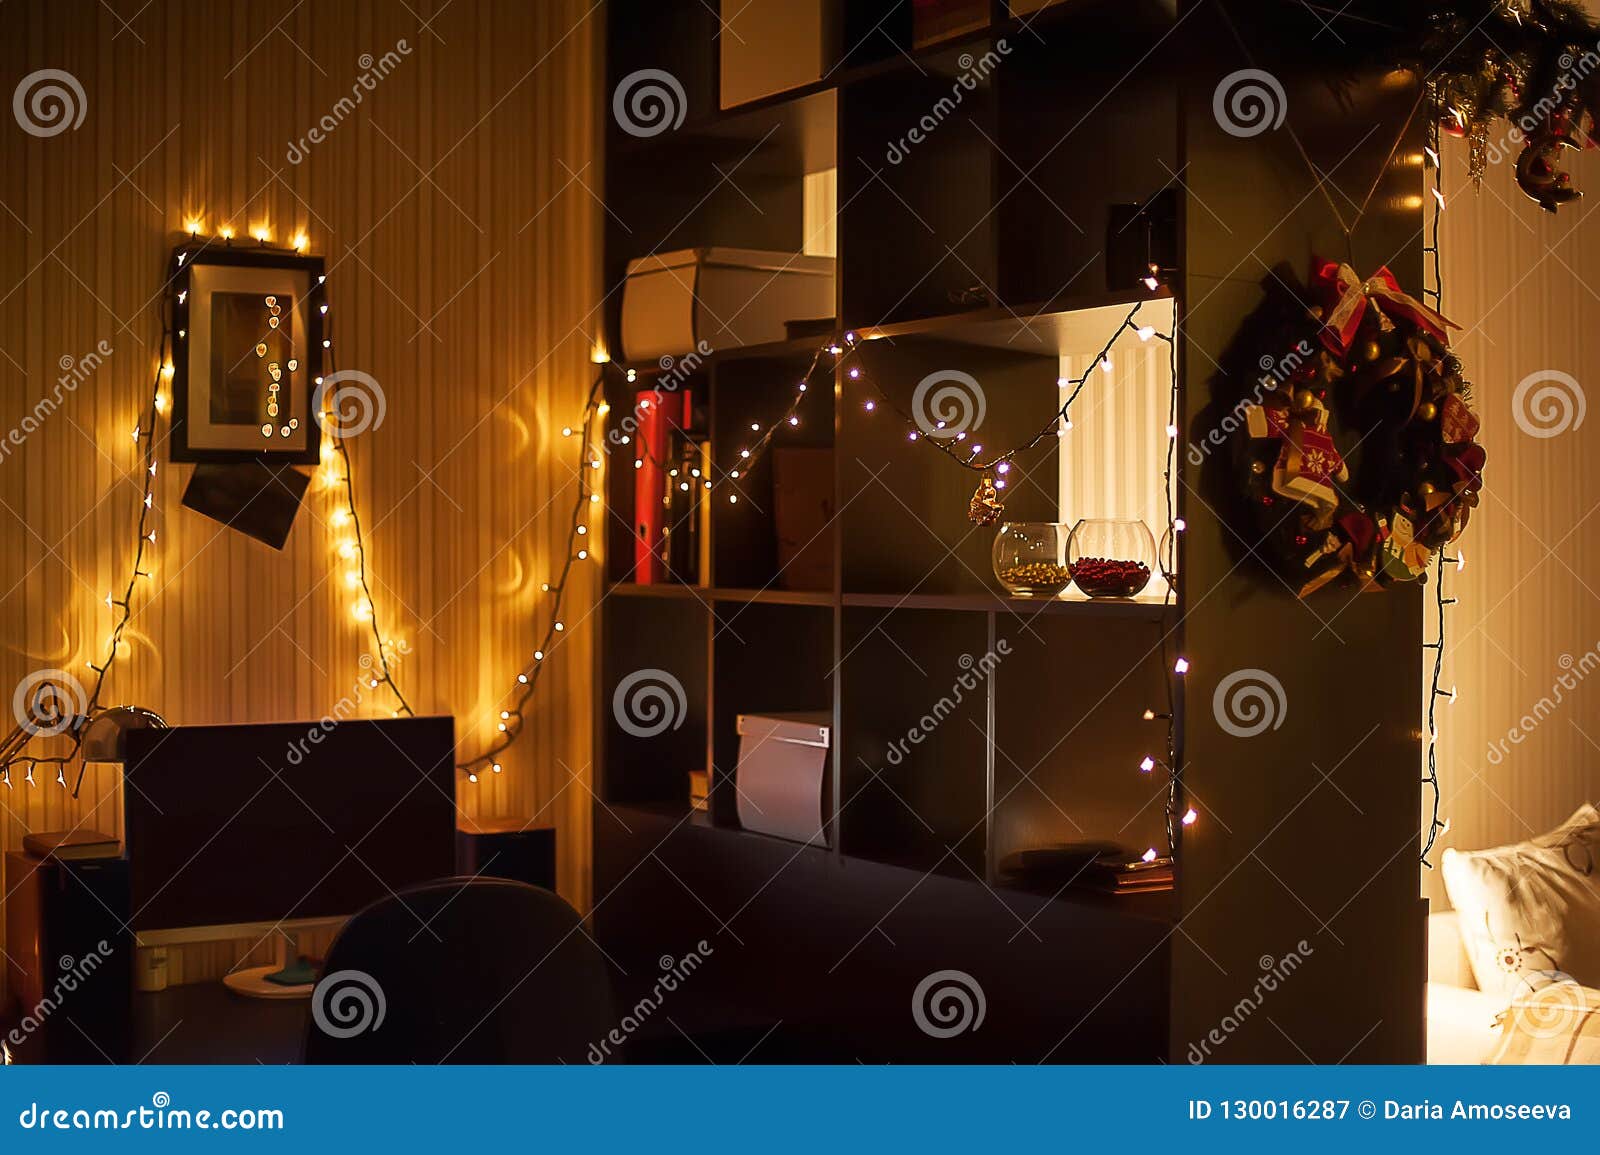 Christmas Interior Decorations. Garlands on the Wall, Wreath and ...